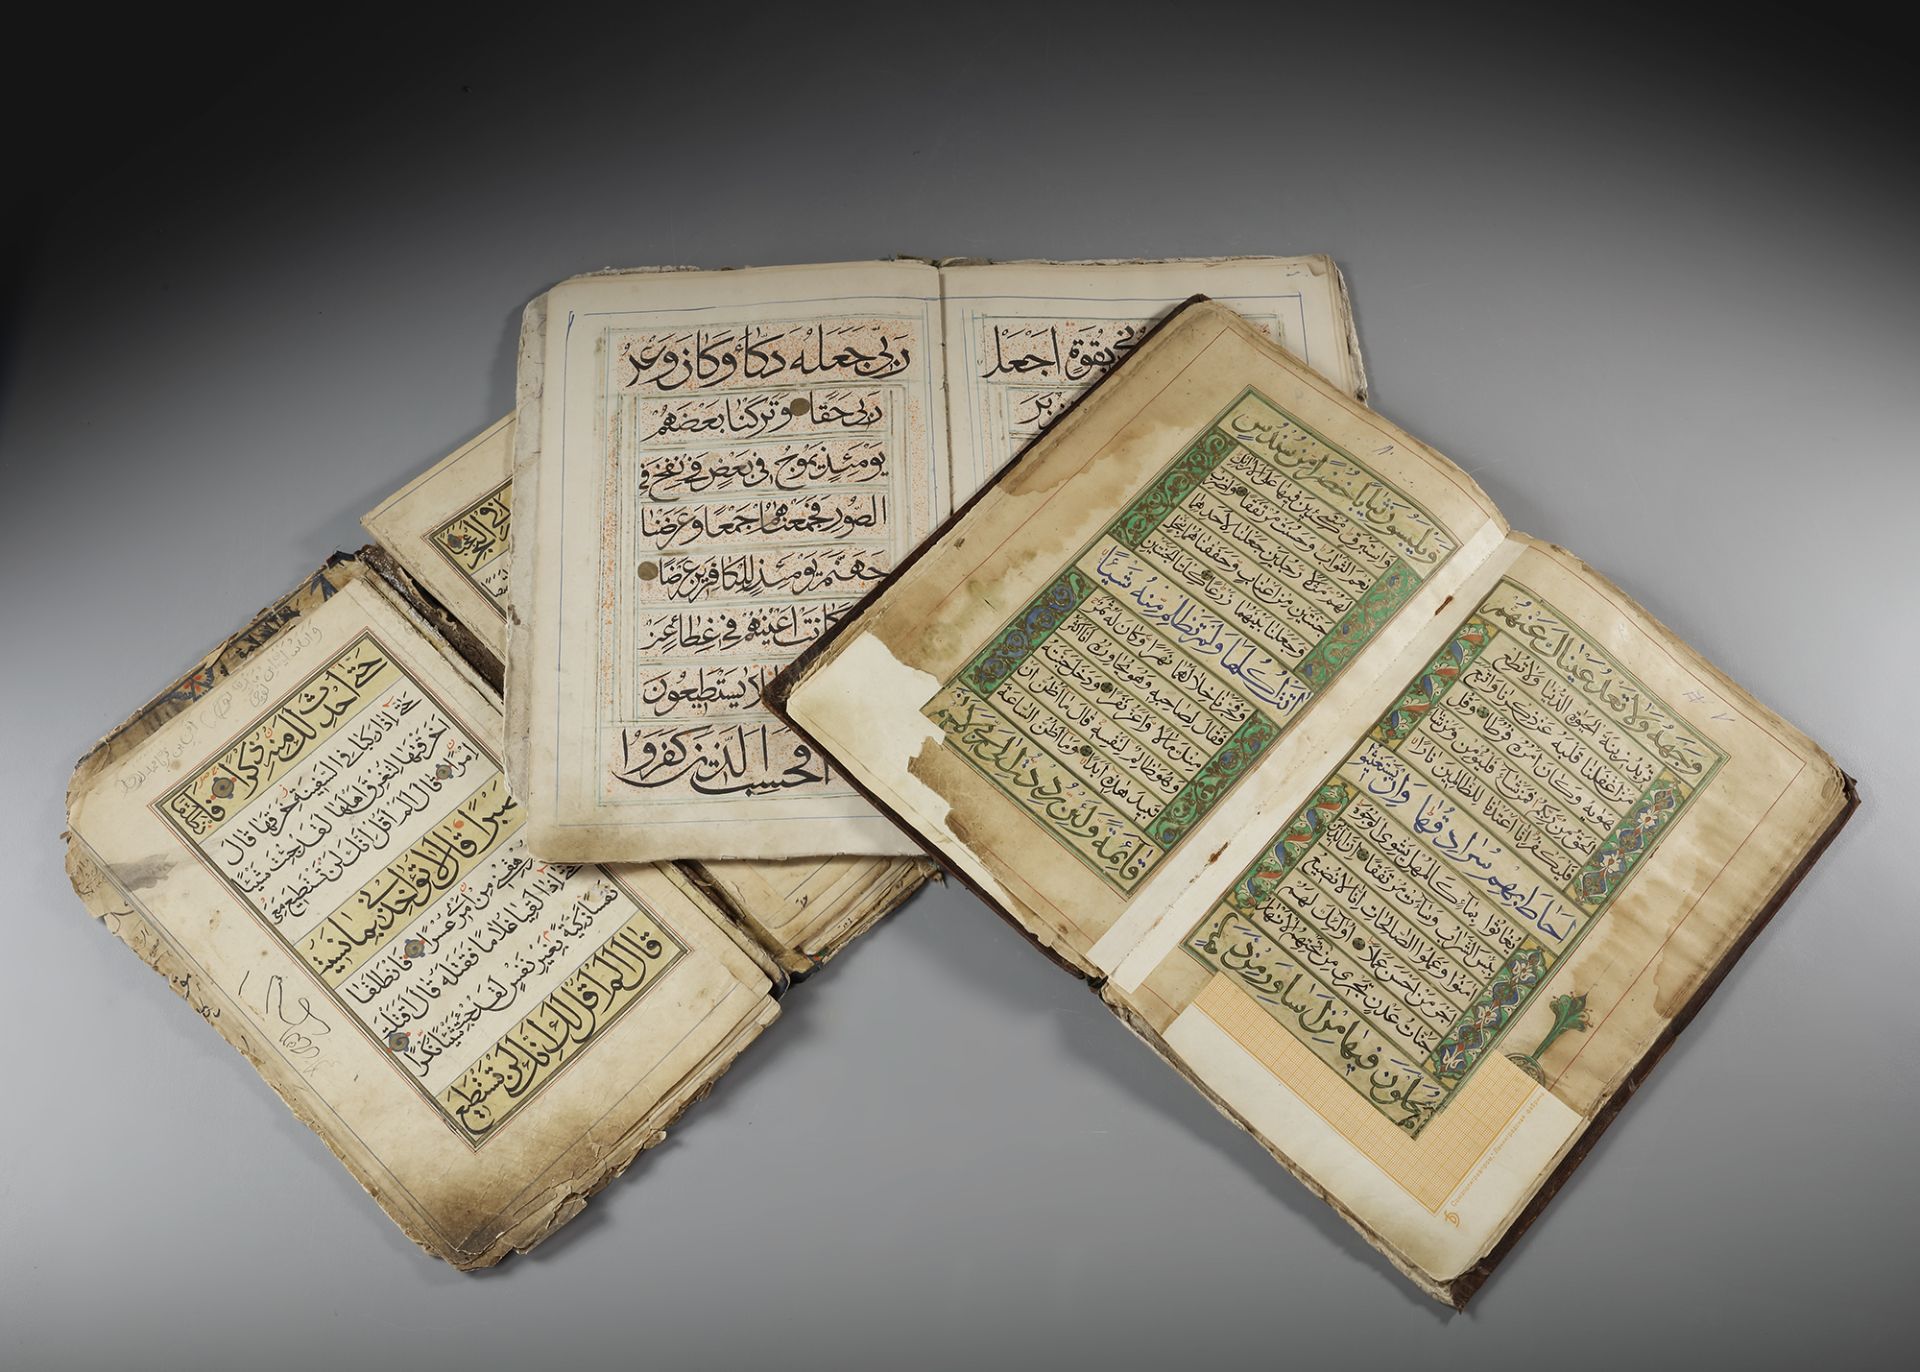 THREE QURAN SECTIONS, CENTRAL ASIA, LATE 19TH CENTURY - Image 2 of 8